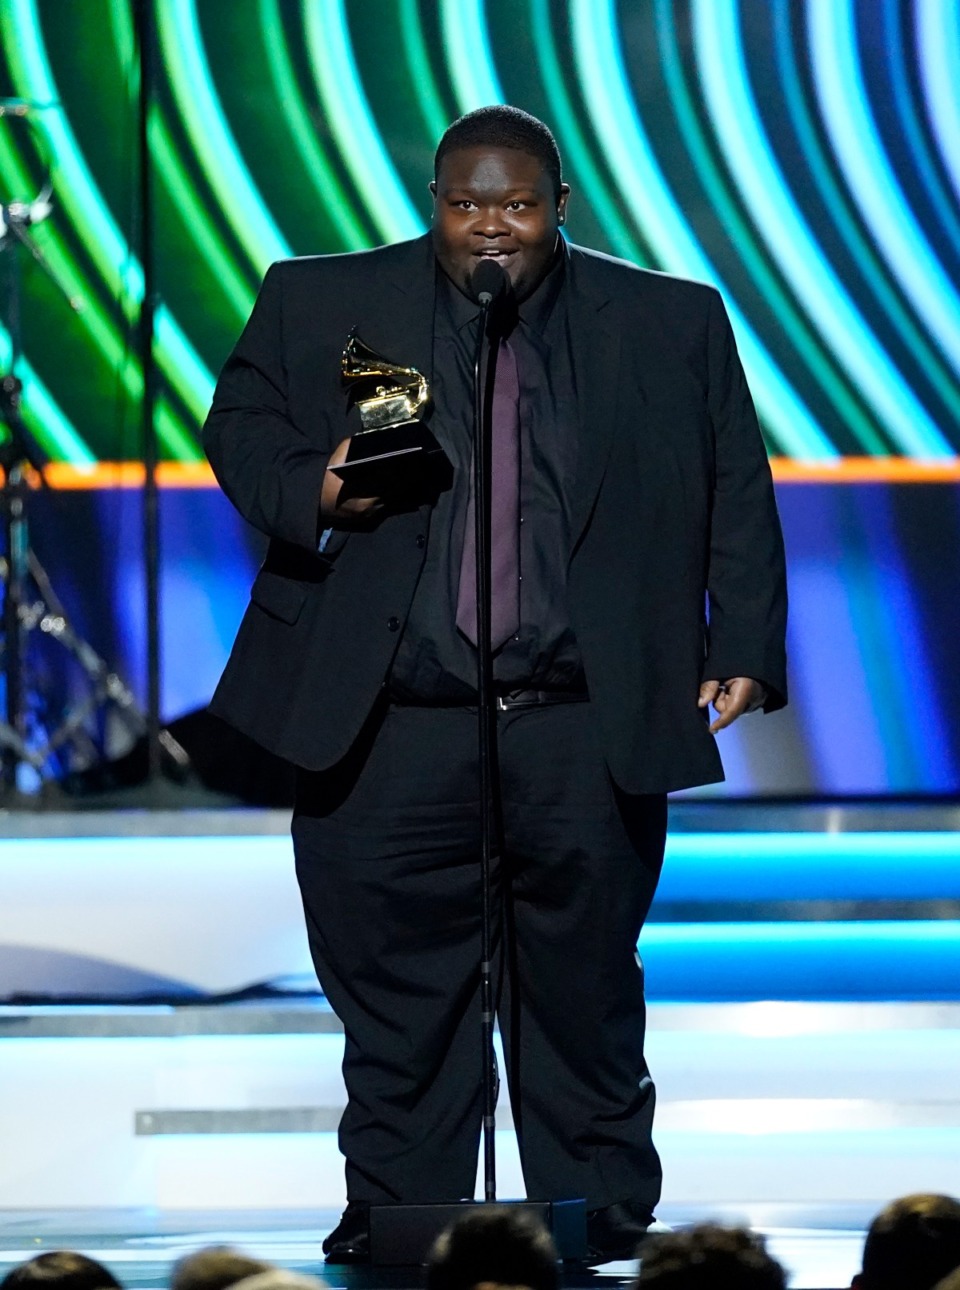 <strong>Christone "Kingfish" Ingram accepts the award for "662" at the 64th Annual Grammy Awards on Sunday, April 3, 2022, in Las Vegas.</strong> (AP Photo/Chris Pizzello)